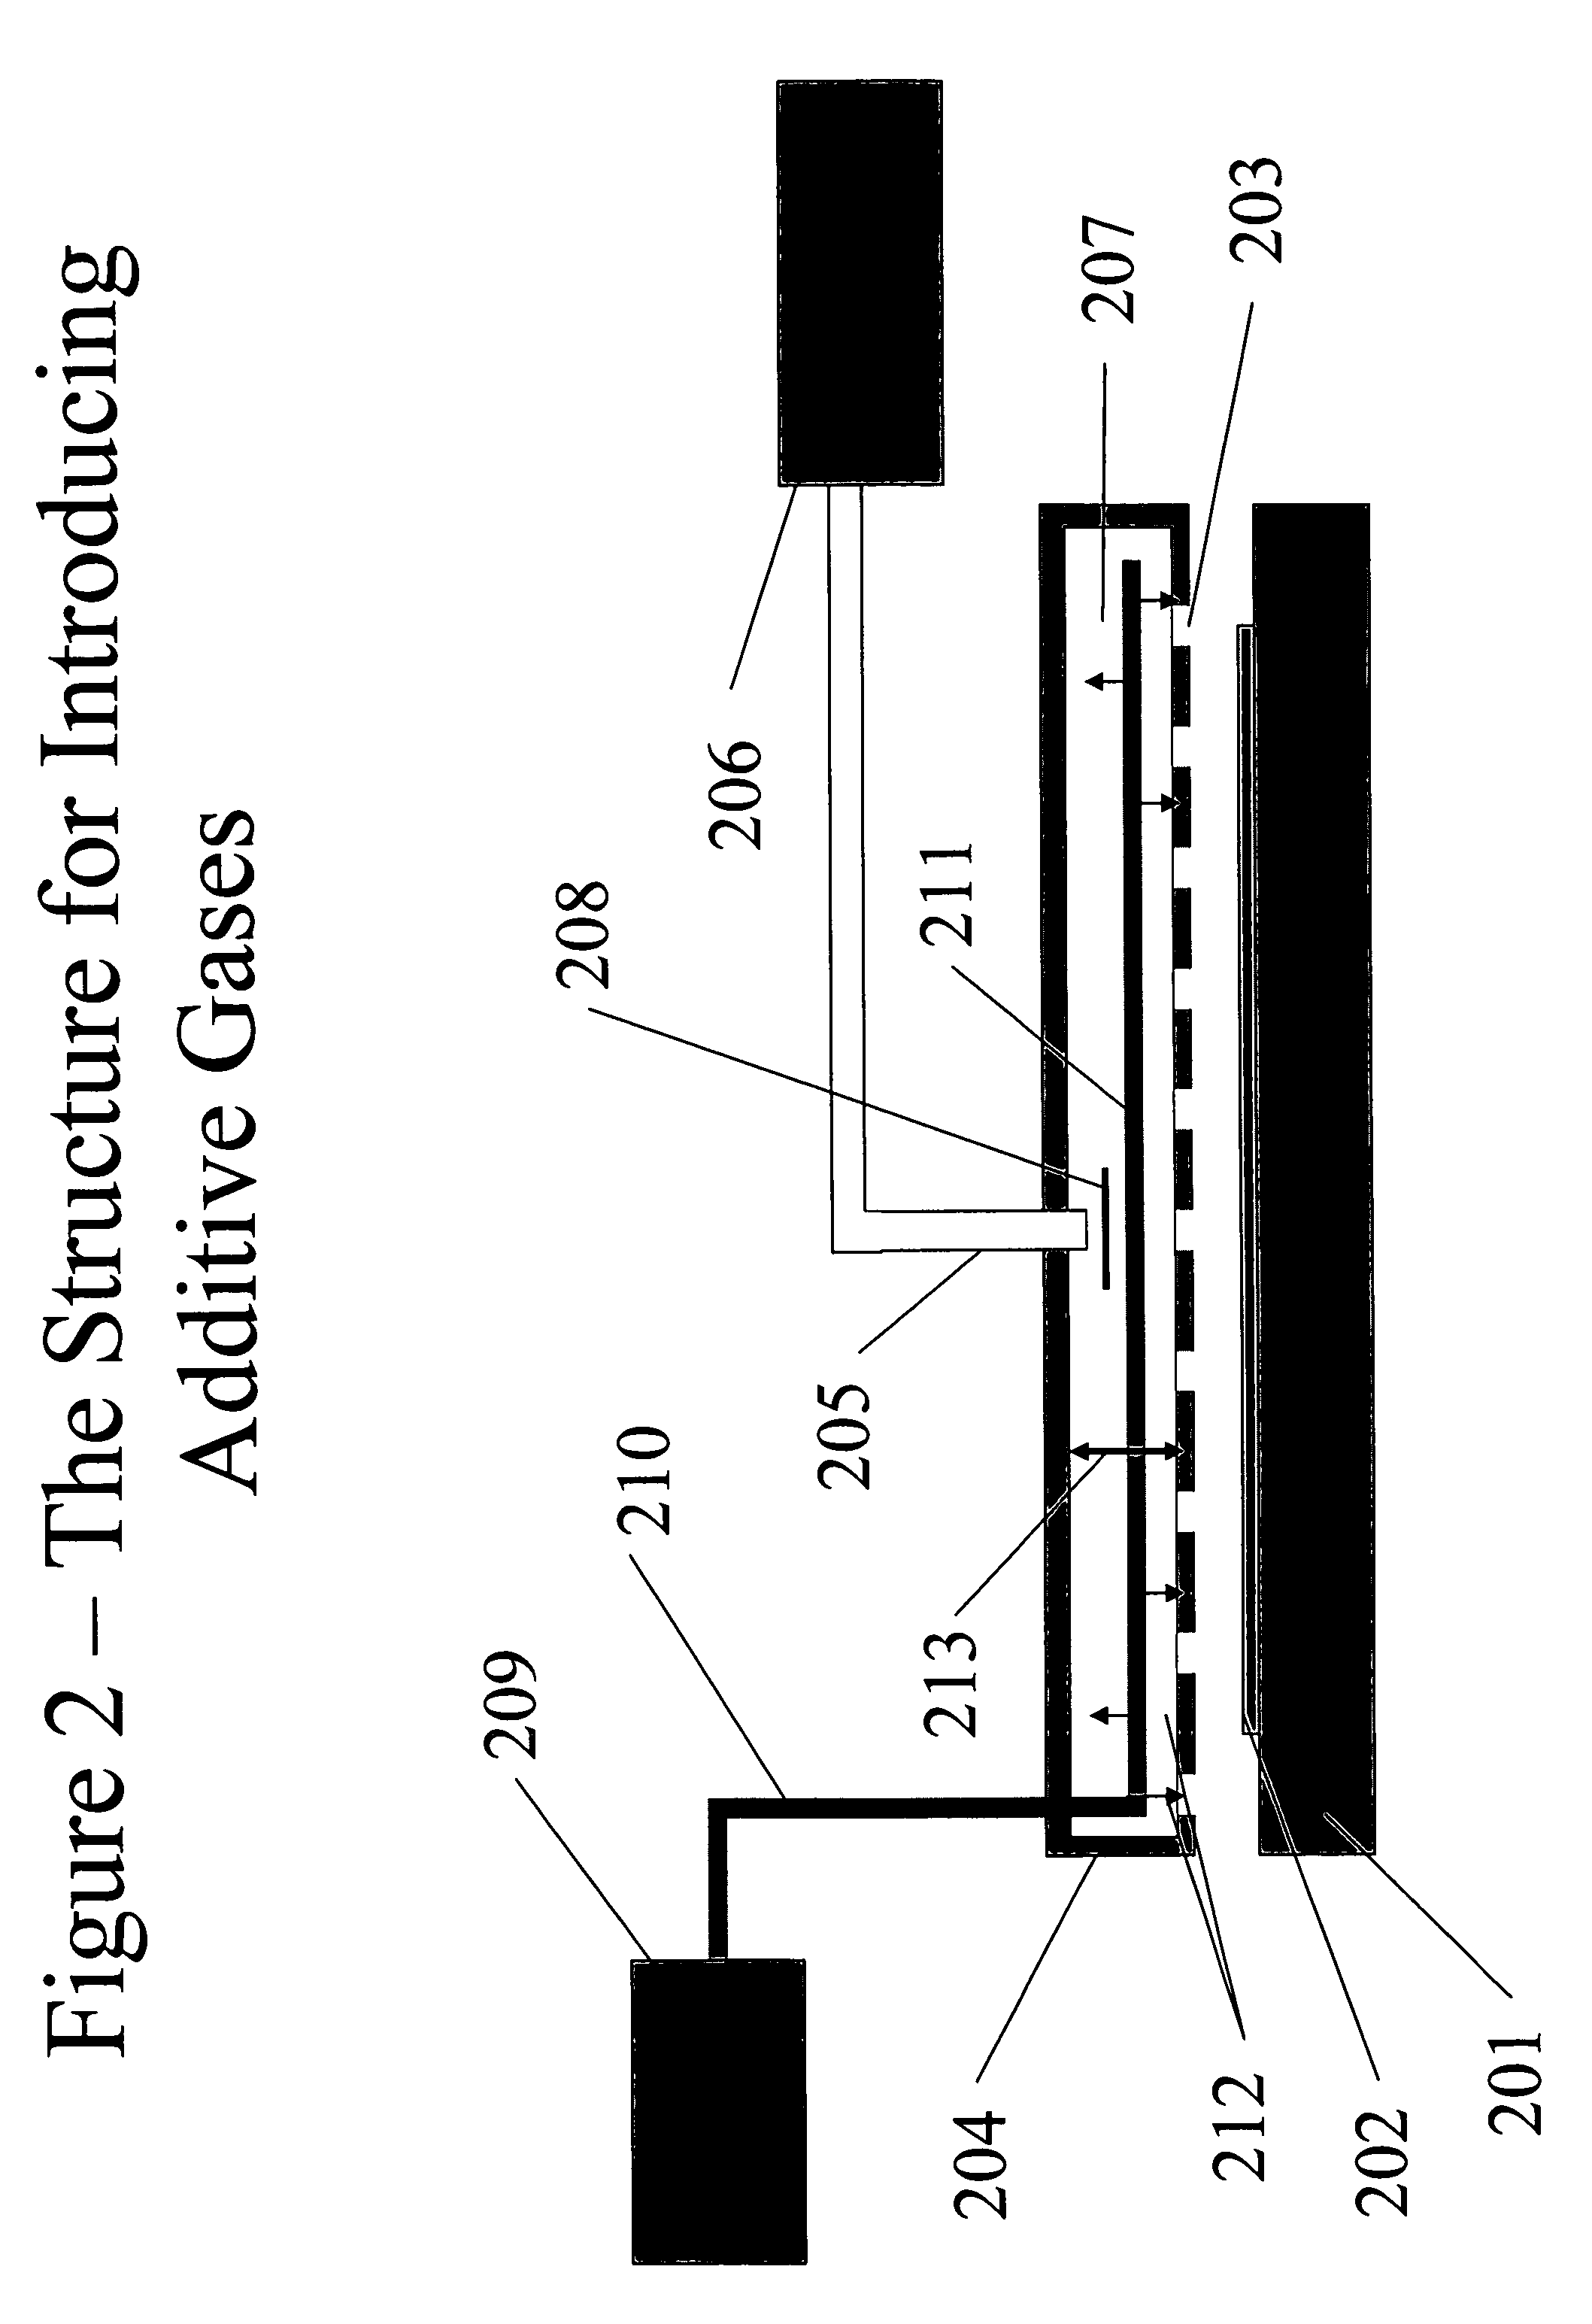 Uniform etching system and process for large rectangular substrates